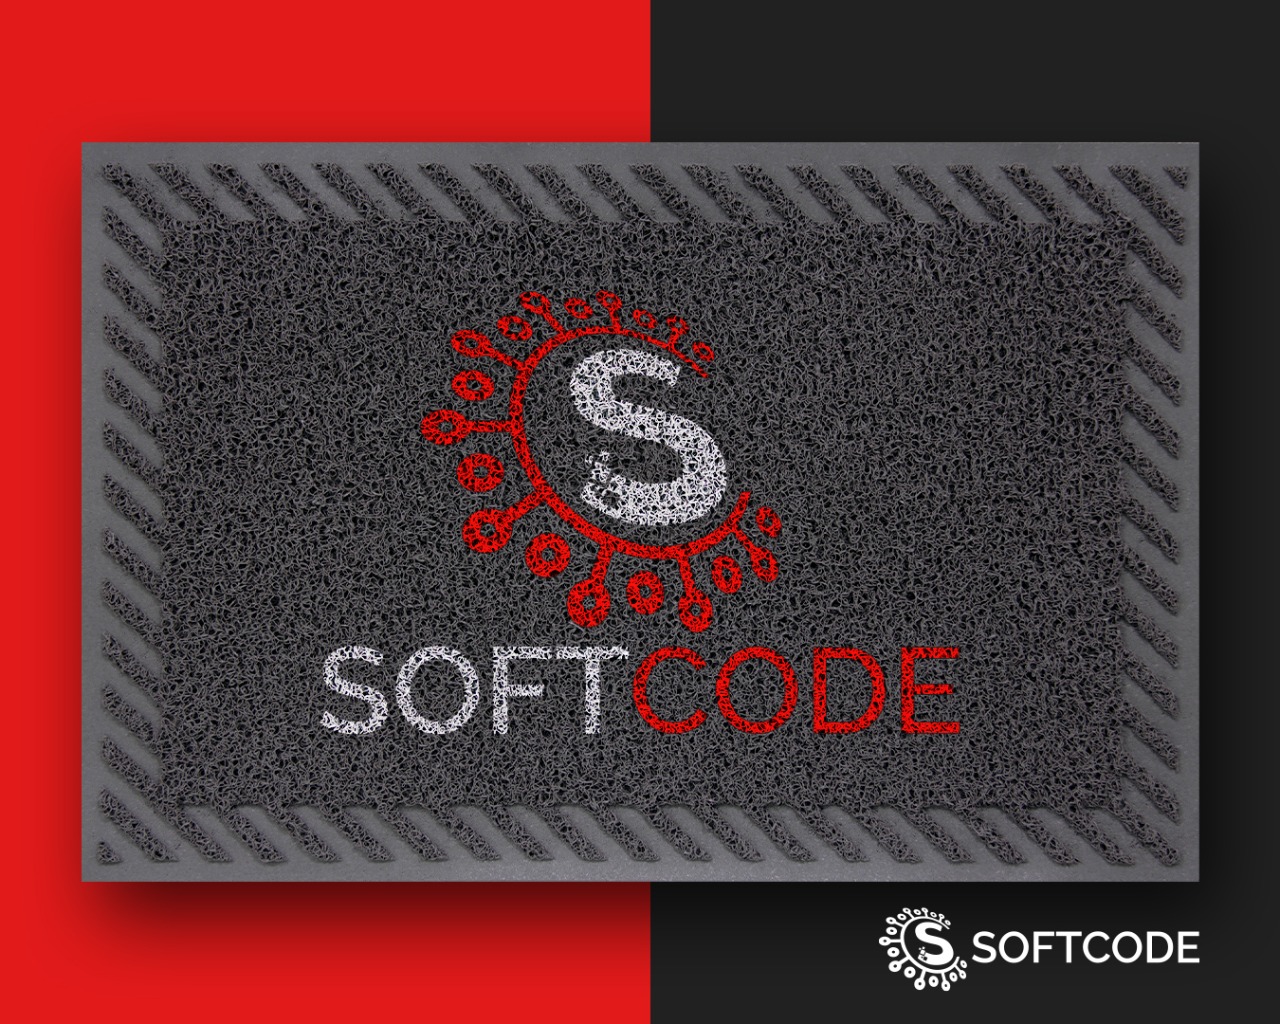 Softcode Shopping